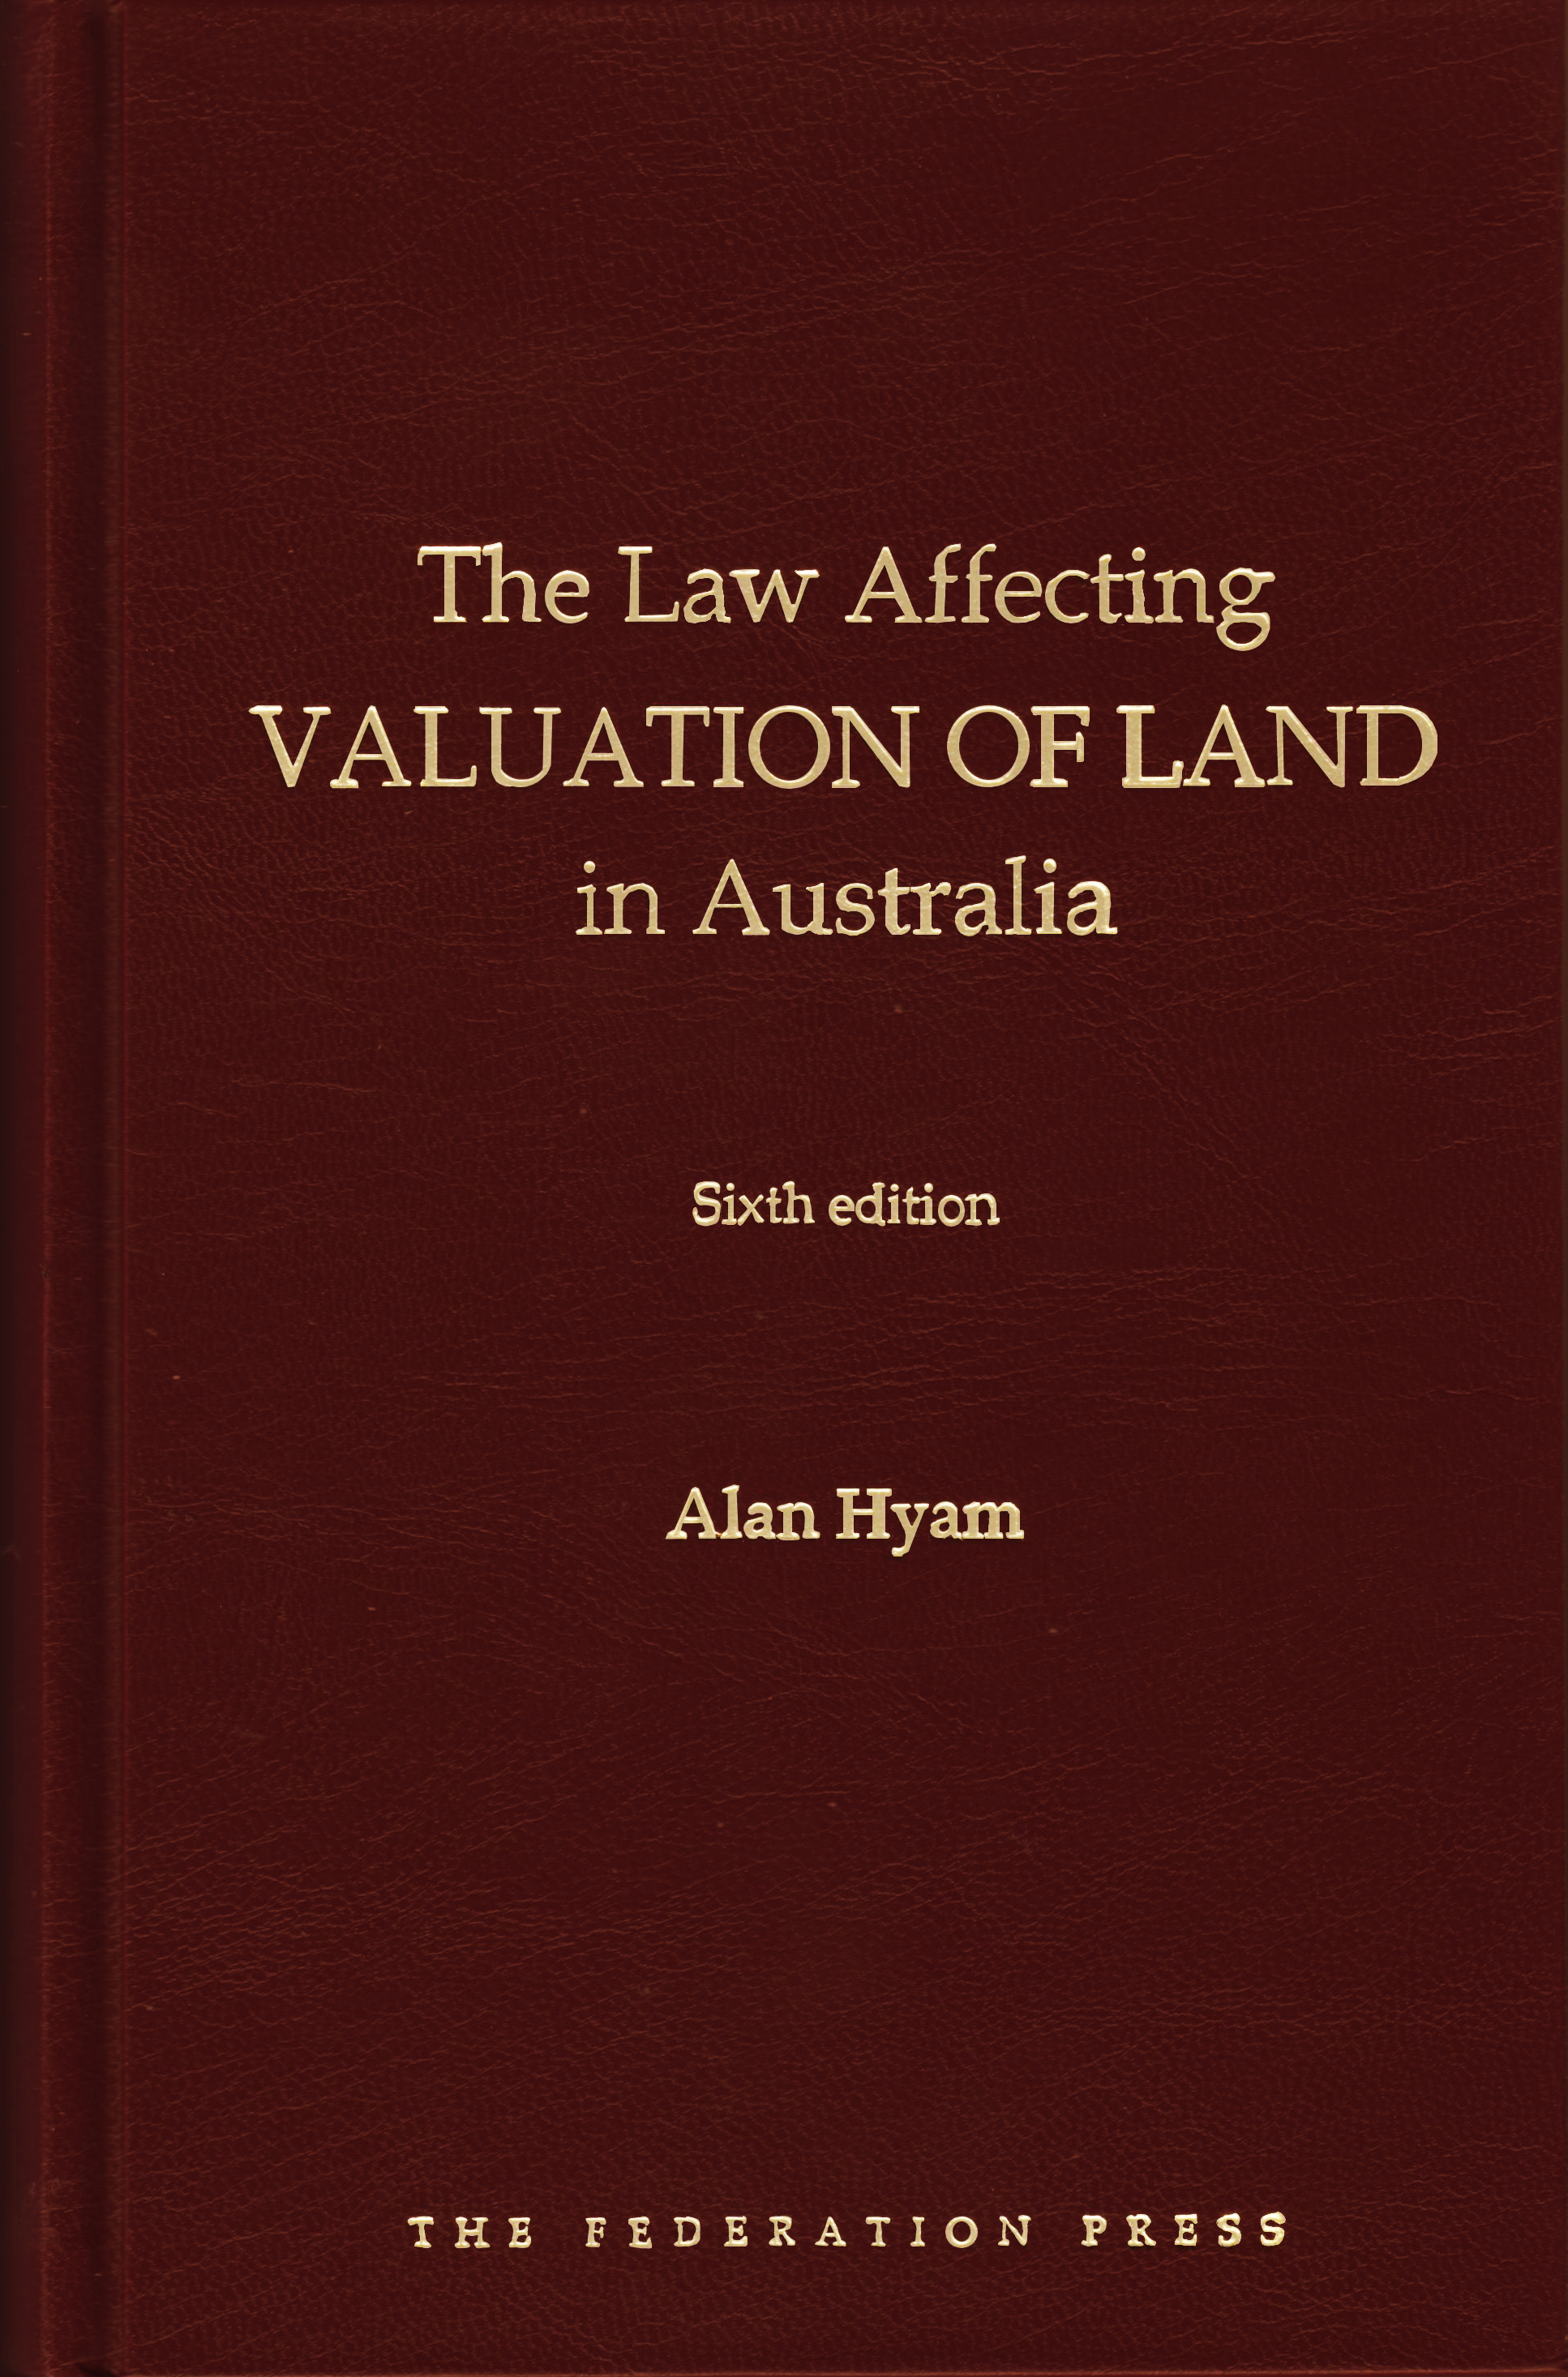 The Law Affecting Valuation of Land in Australia e6